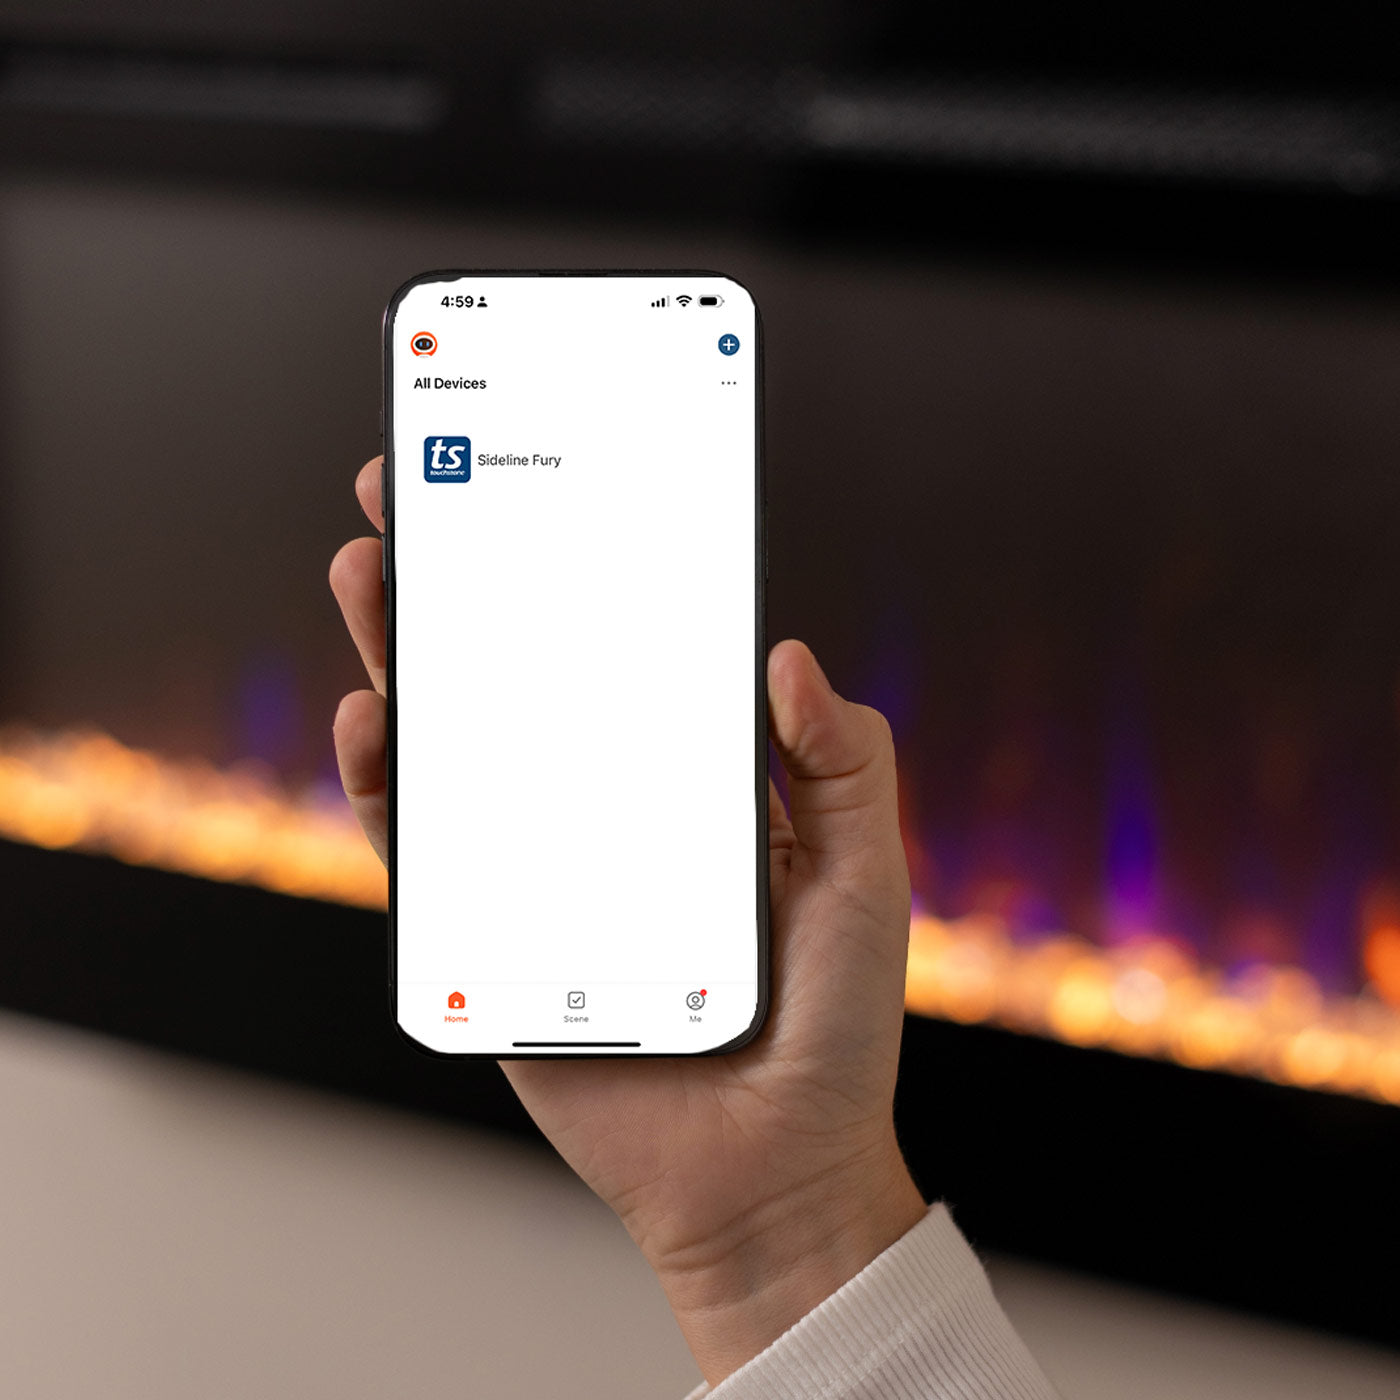 Setting up Touchstone app to control Sideline Fury Smart Electric Fireplace